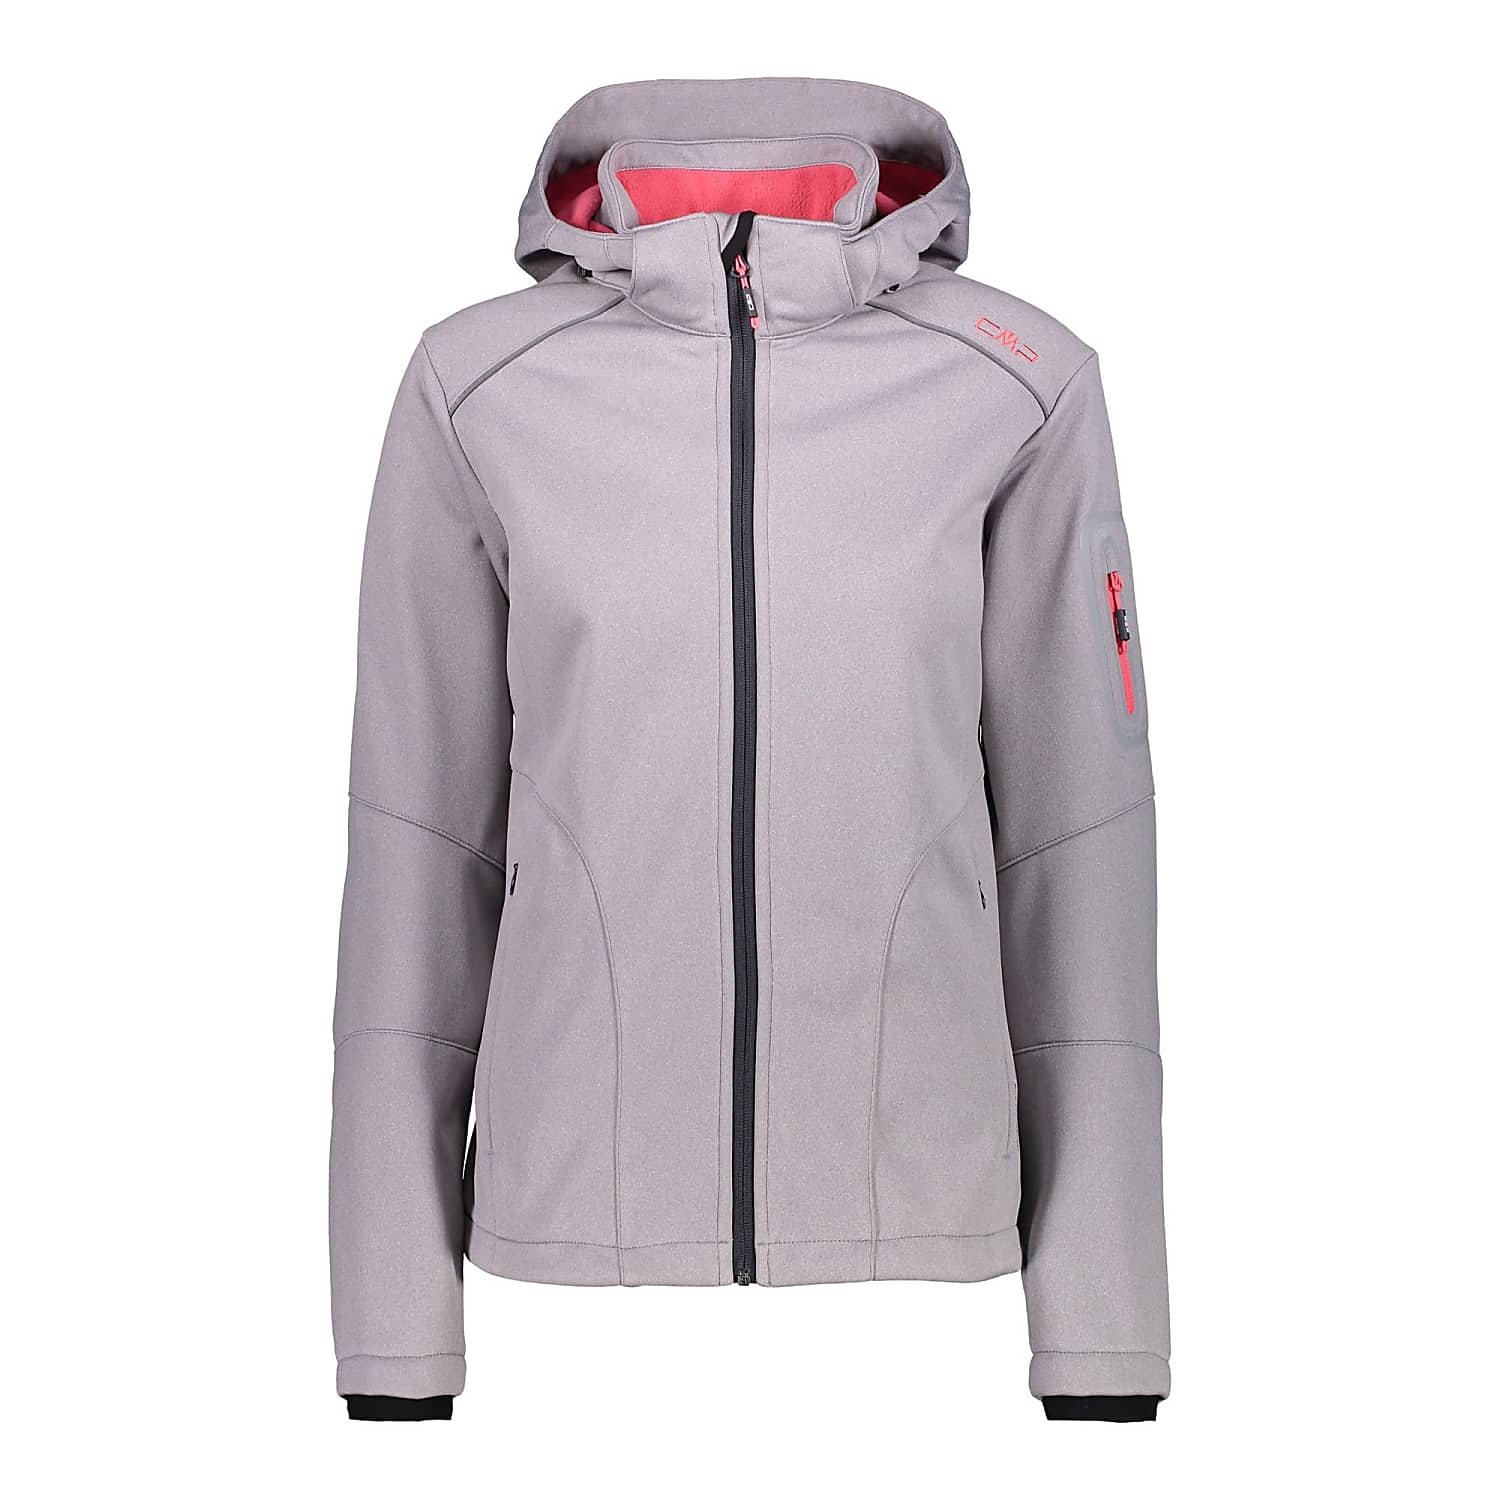 CMP W JACKET ZIP - - Argento Fast Mel. shipping and SOFTSHELL, cheap Corallo HOOD